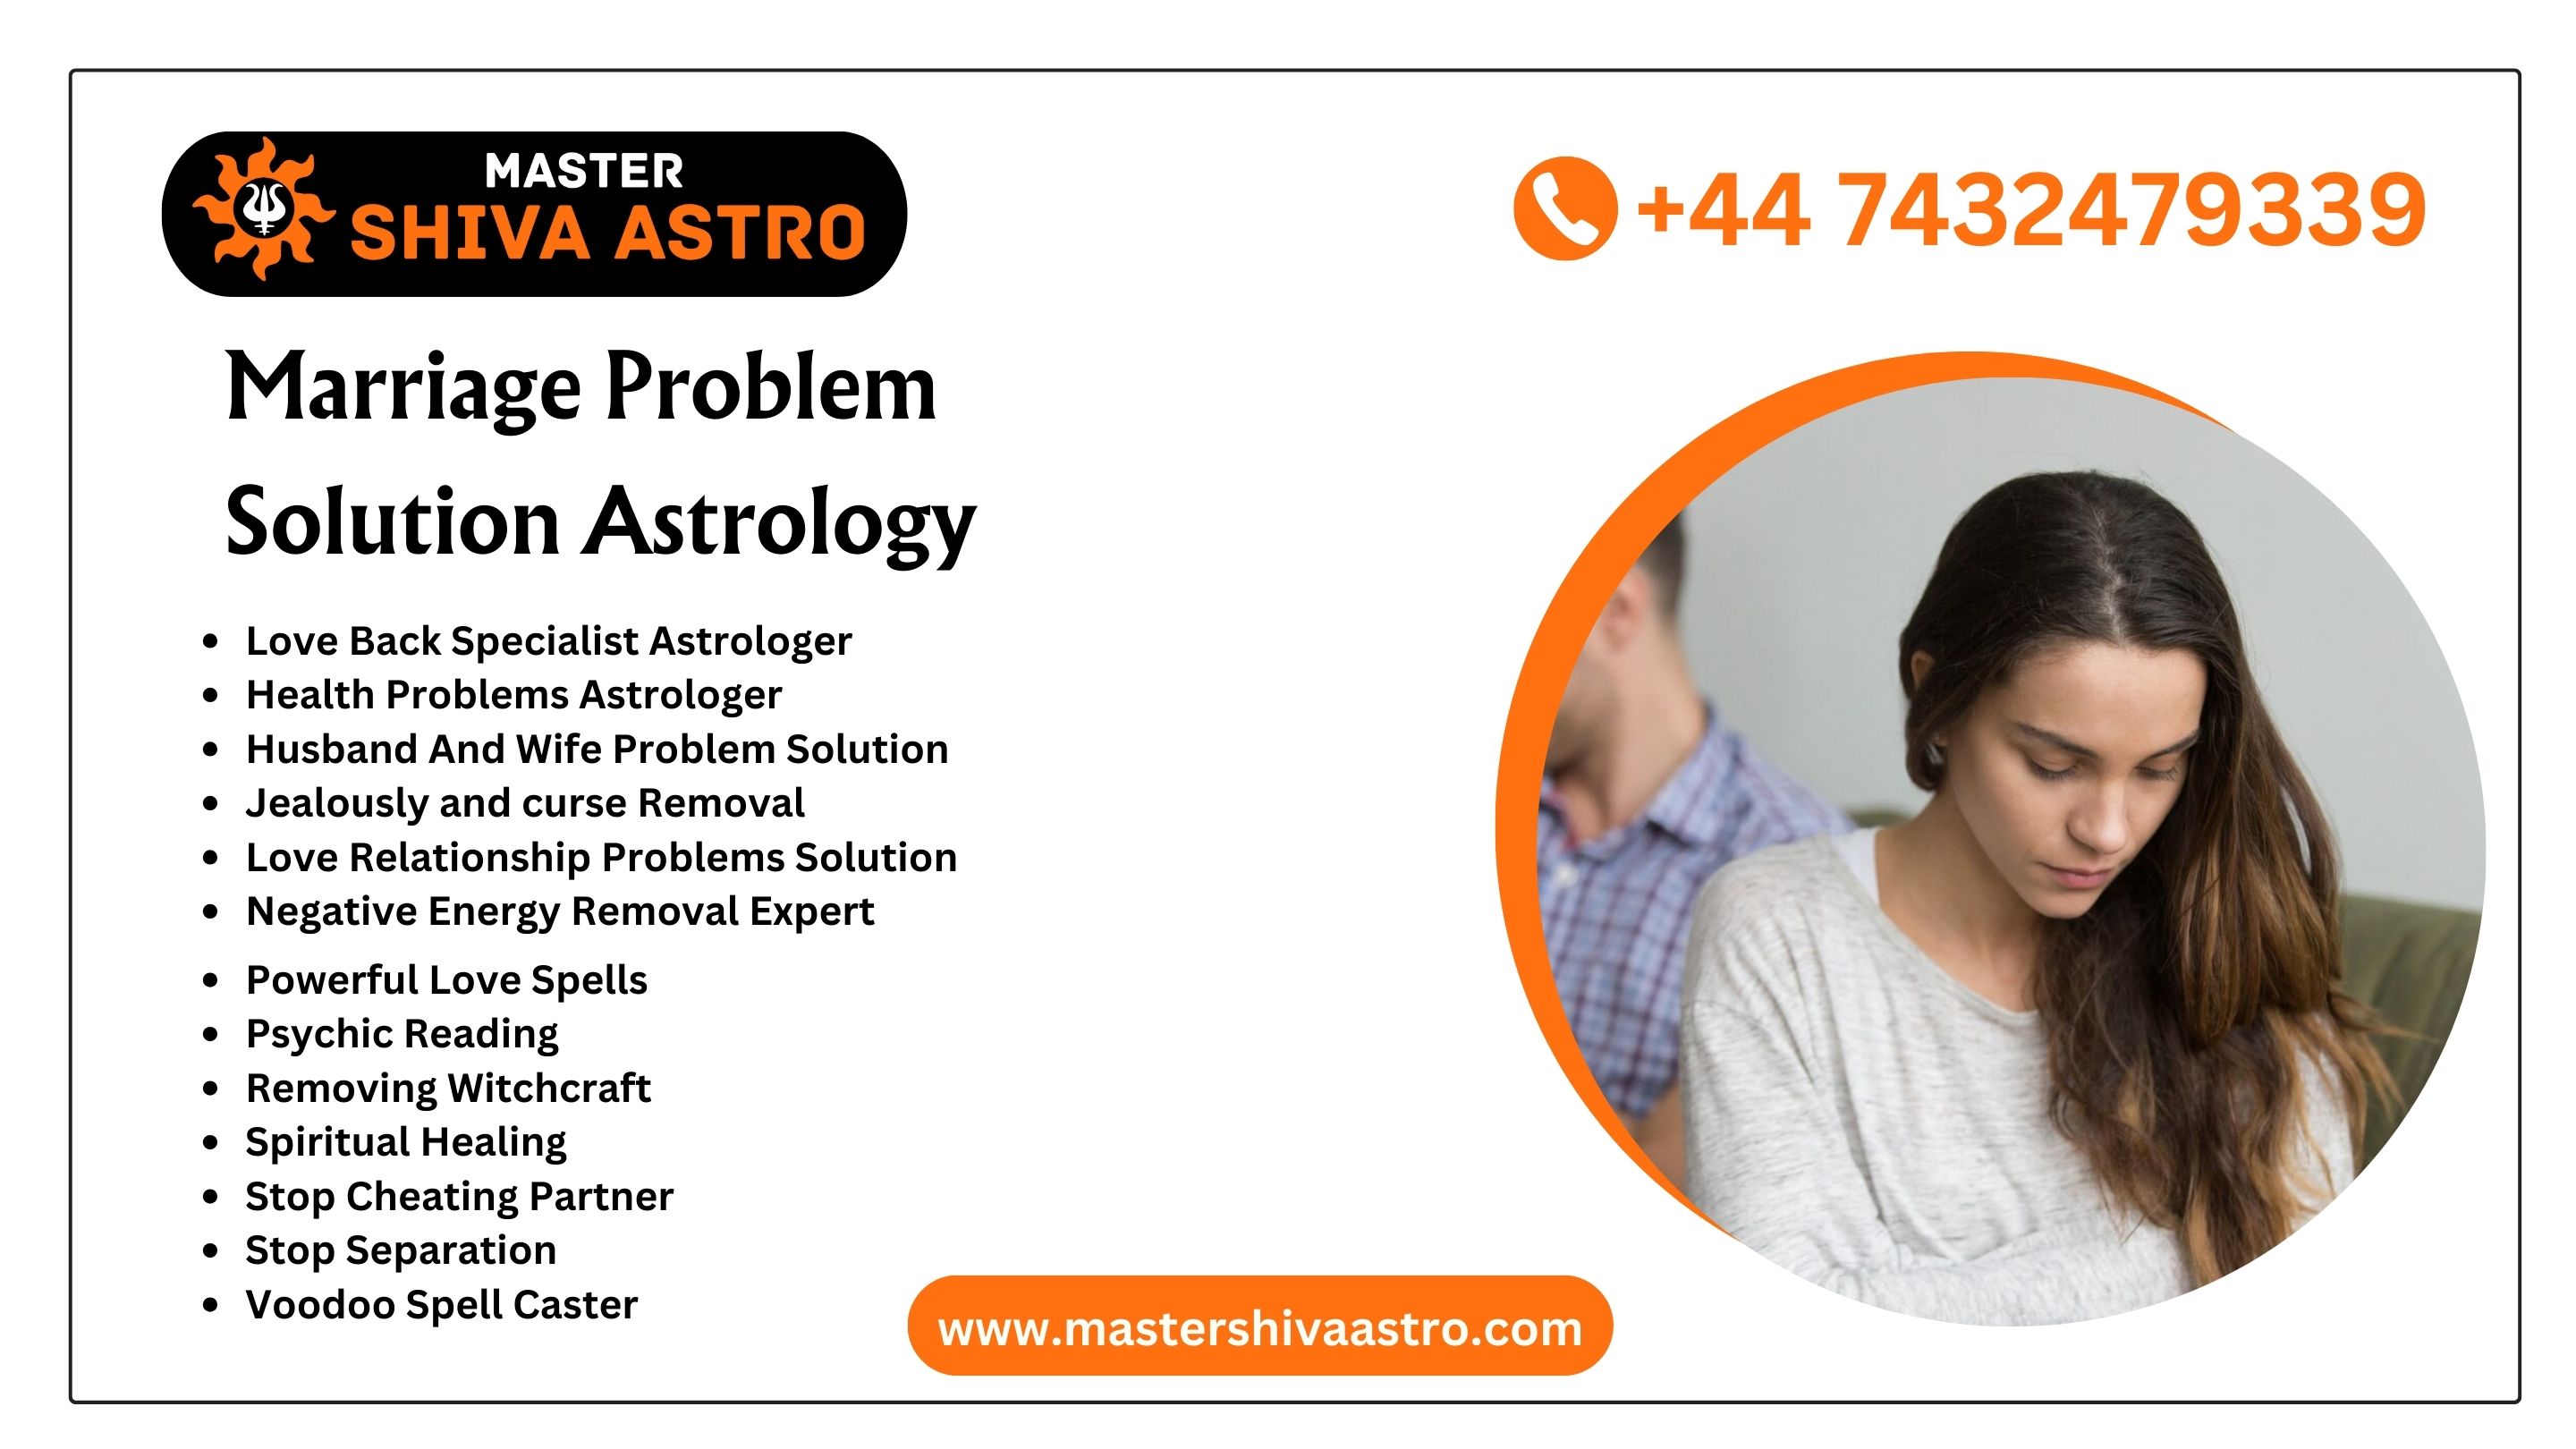 Marriage Problem Solution Astrology - Master Shiva